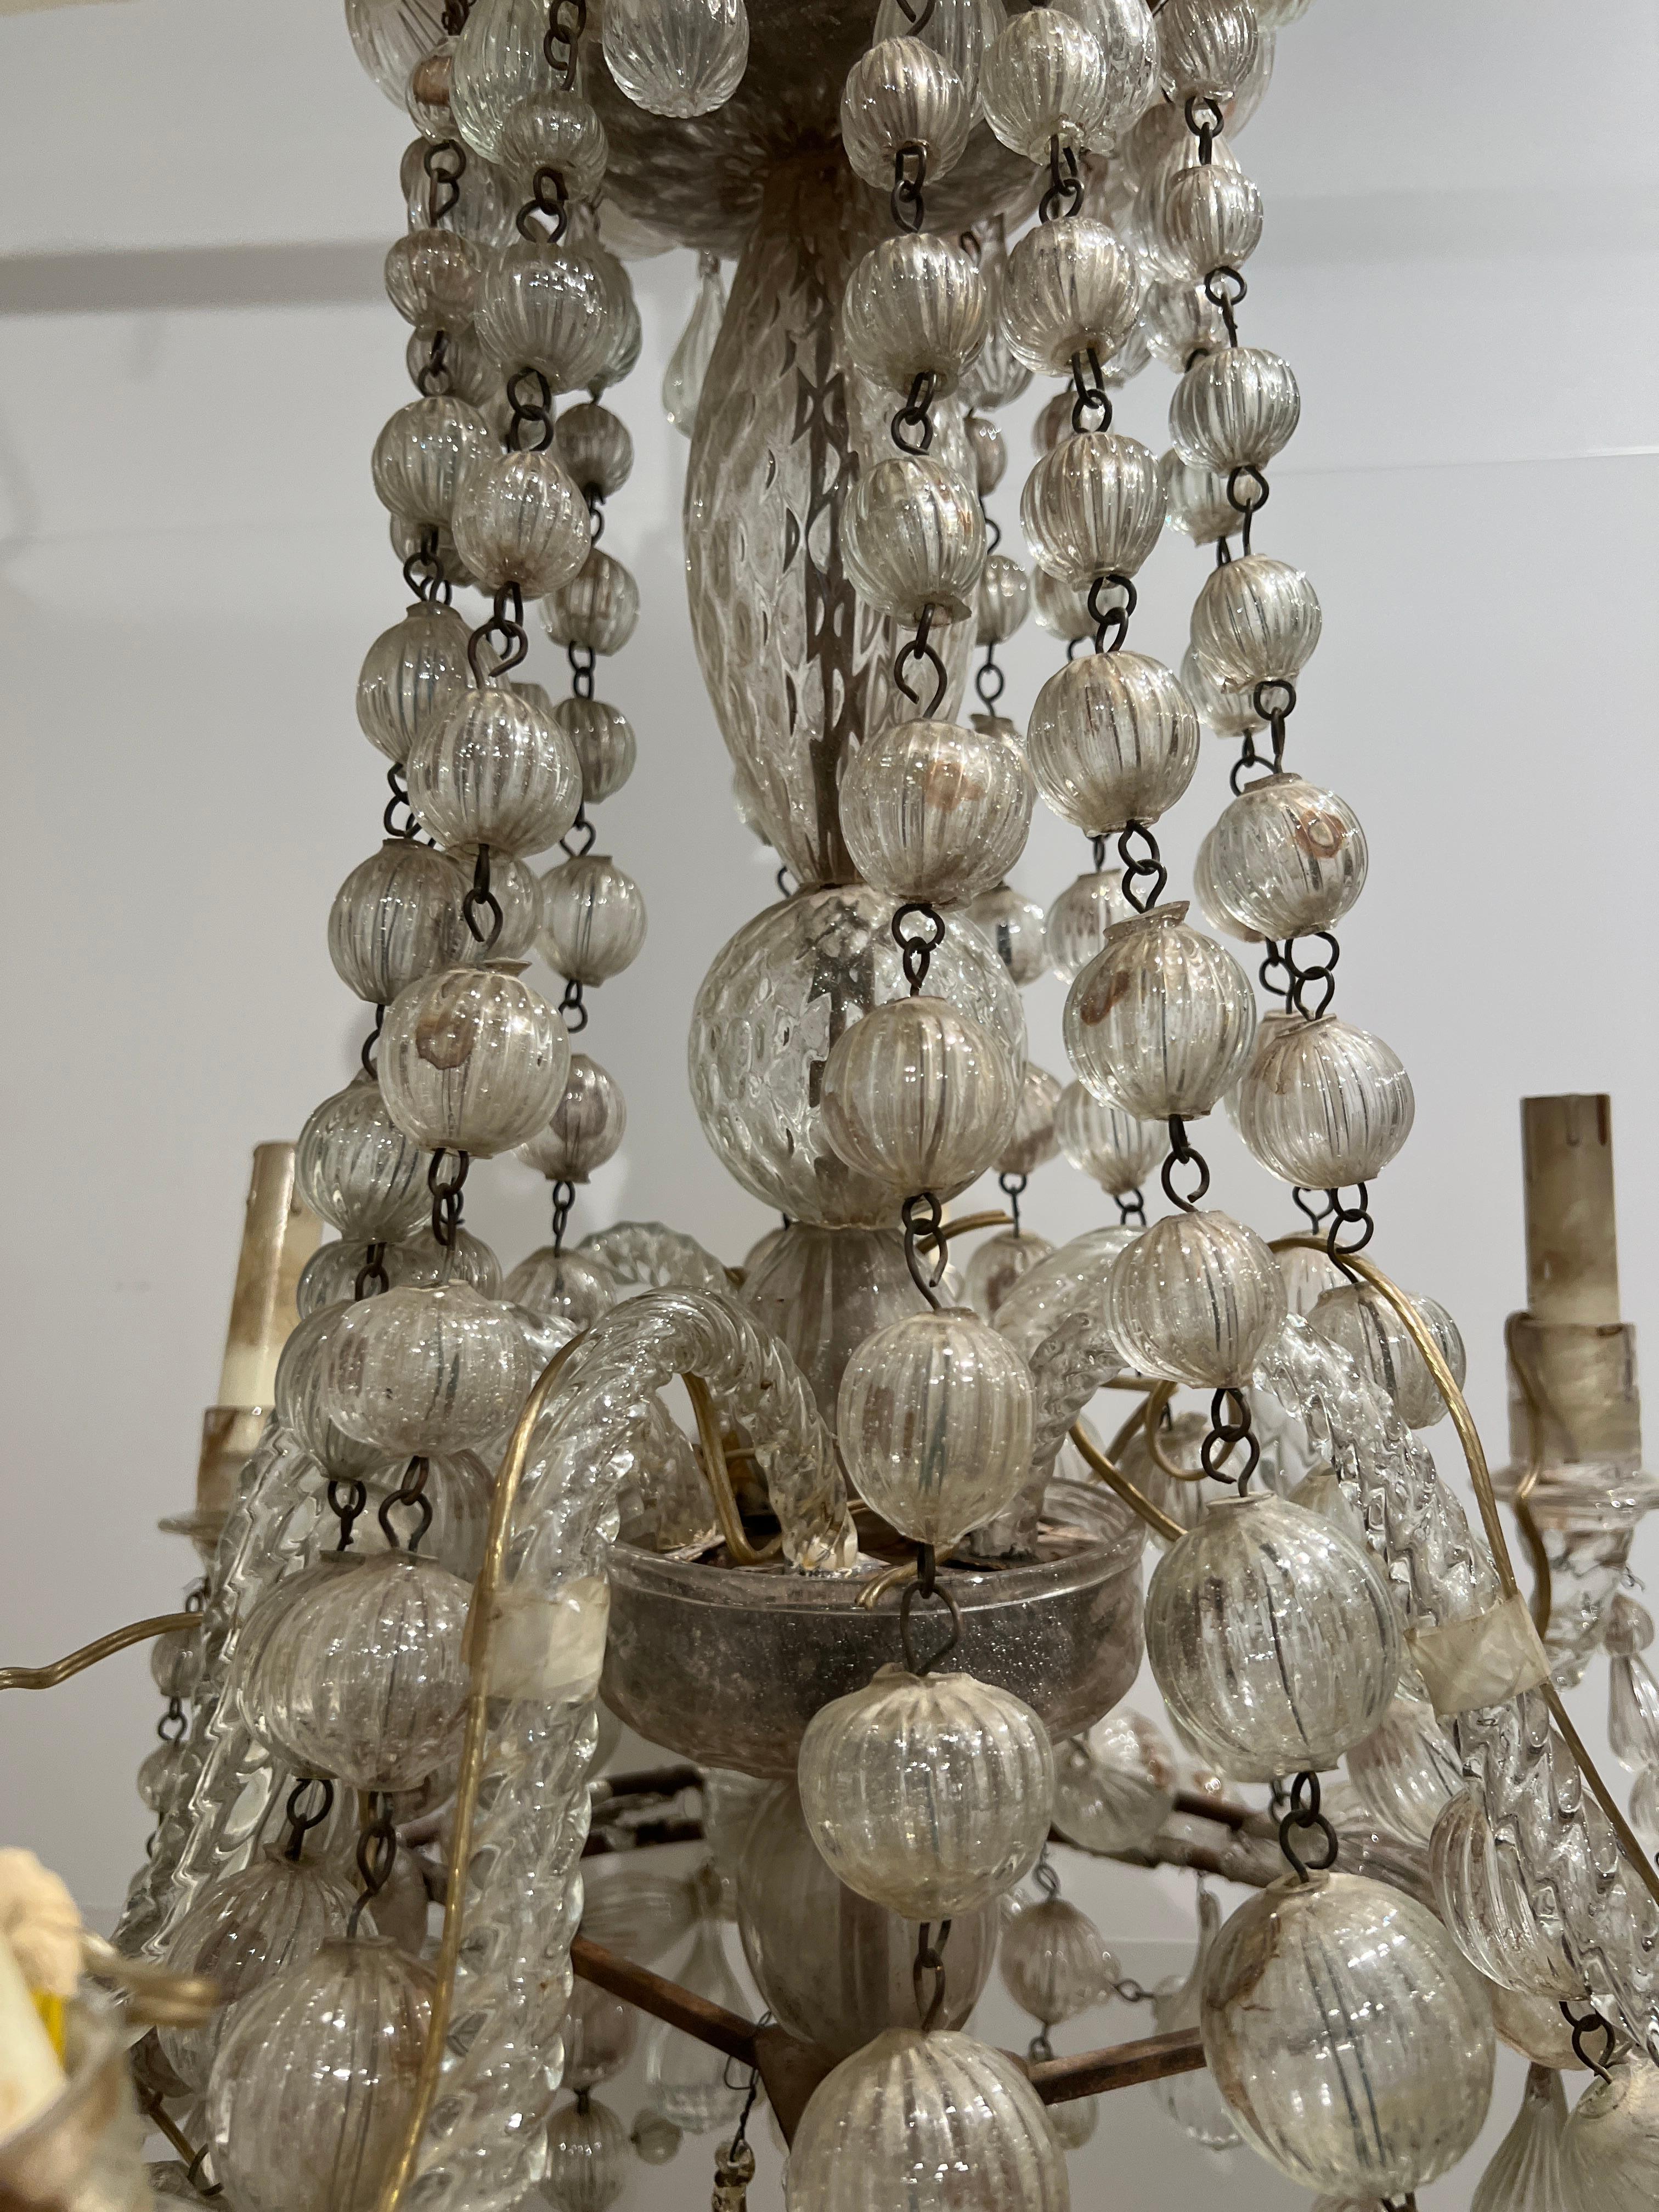 18th century Venetian chandelier with hand blown glass. Exquisite leafed crown at the top and bottom. Ribbed glass balls decorate the bands at top and bottom of the chandelier with accents of ribbed drops as well. 8 glass arms. Fine craftsmanship.